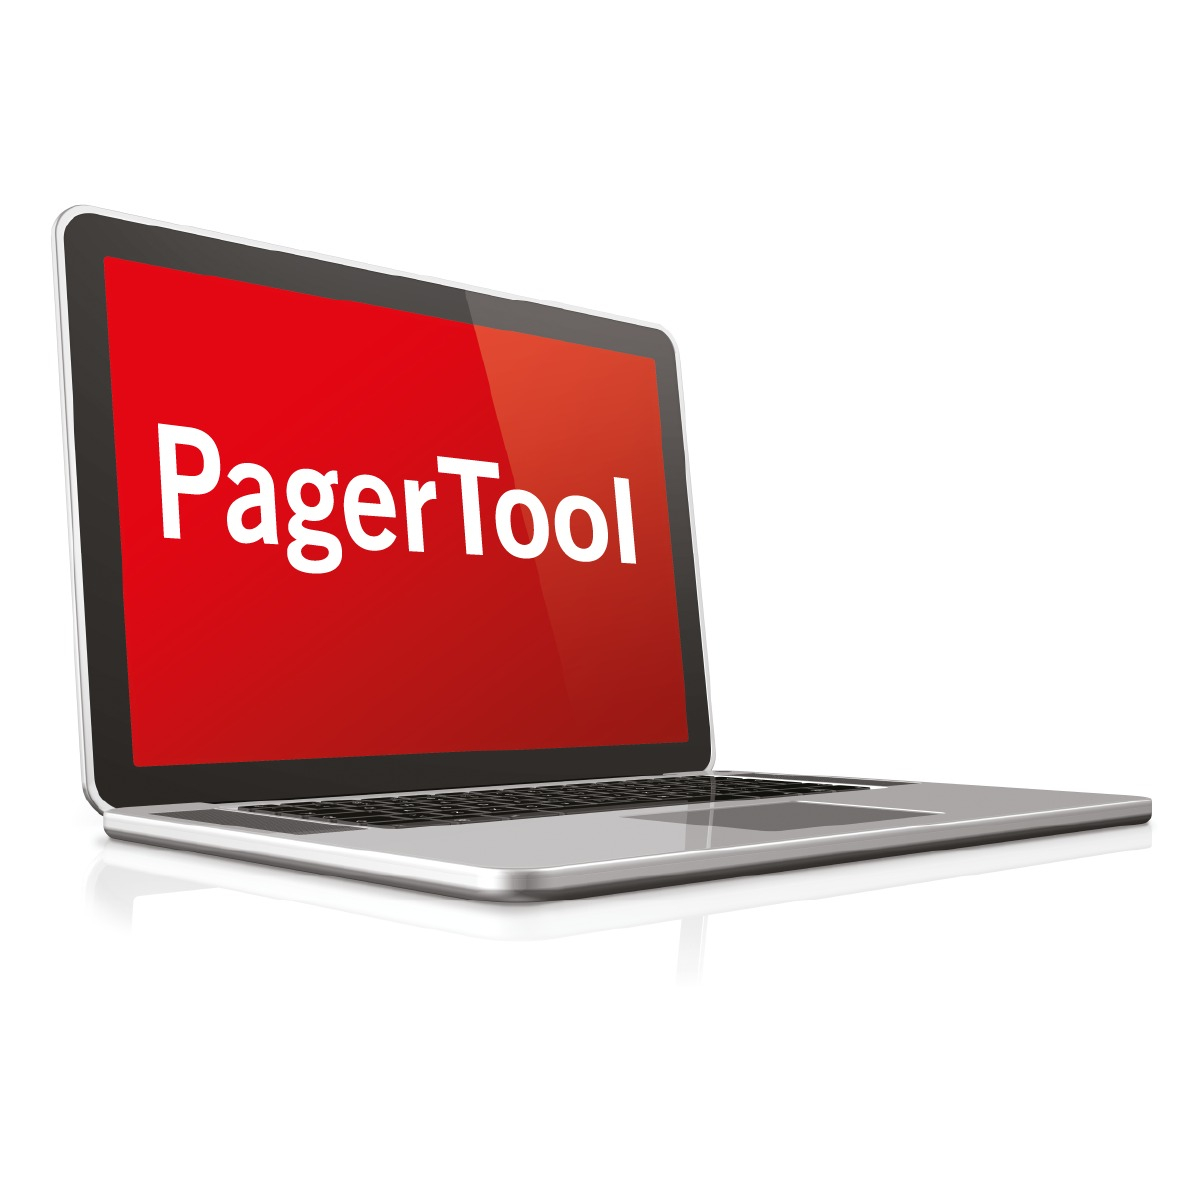 Laptop displaying a red screen with the text 'PagerTool'